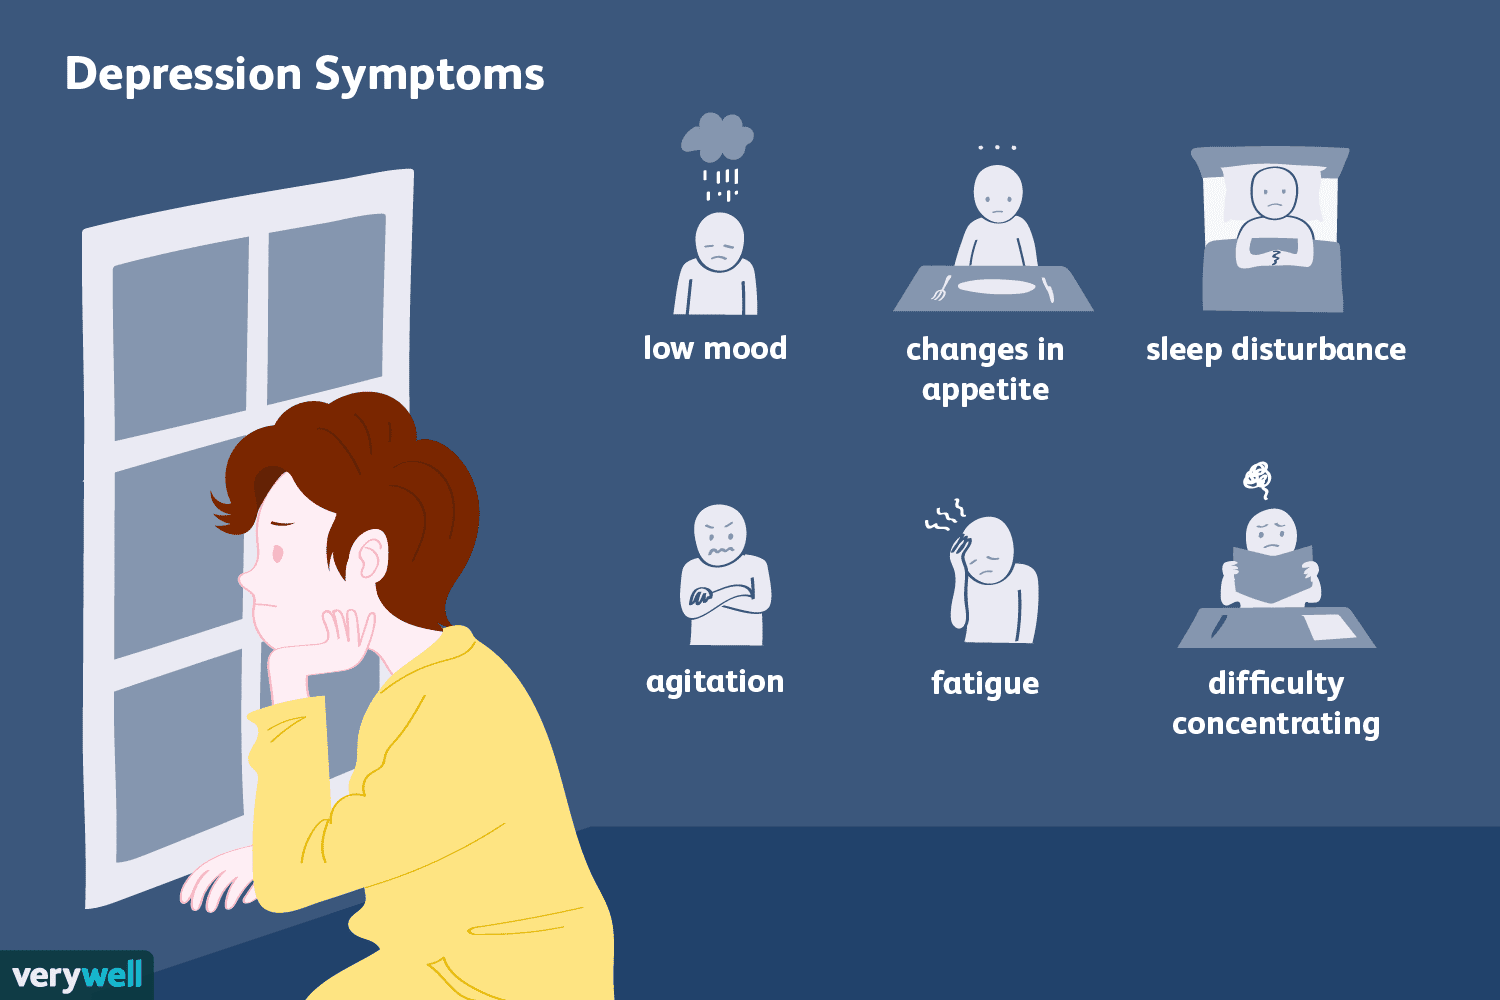 Common Symptoms of Clinical Depression